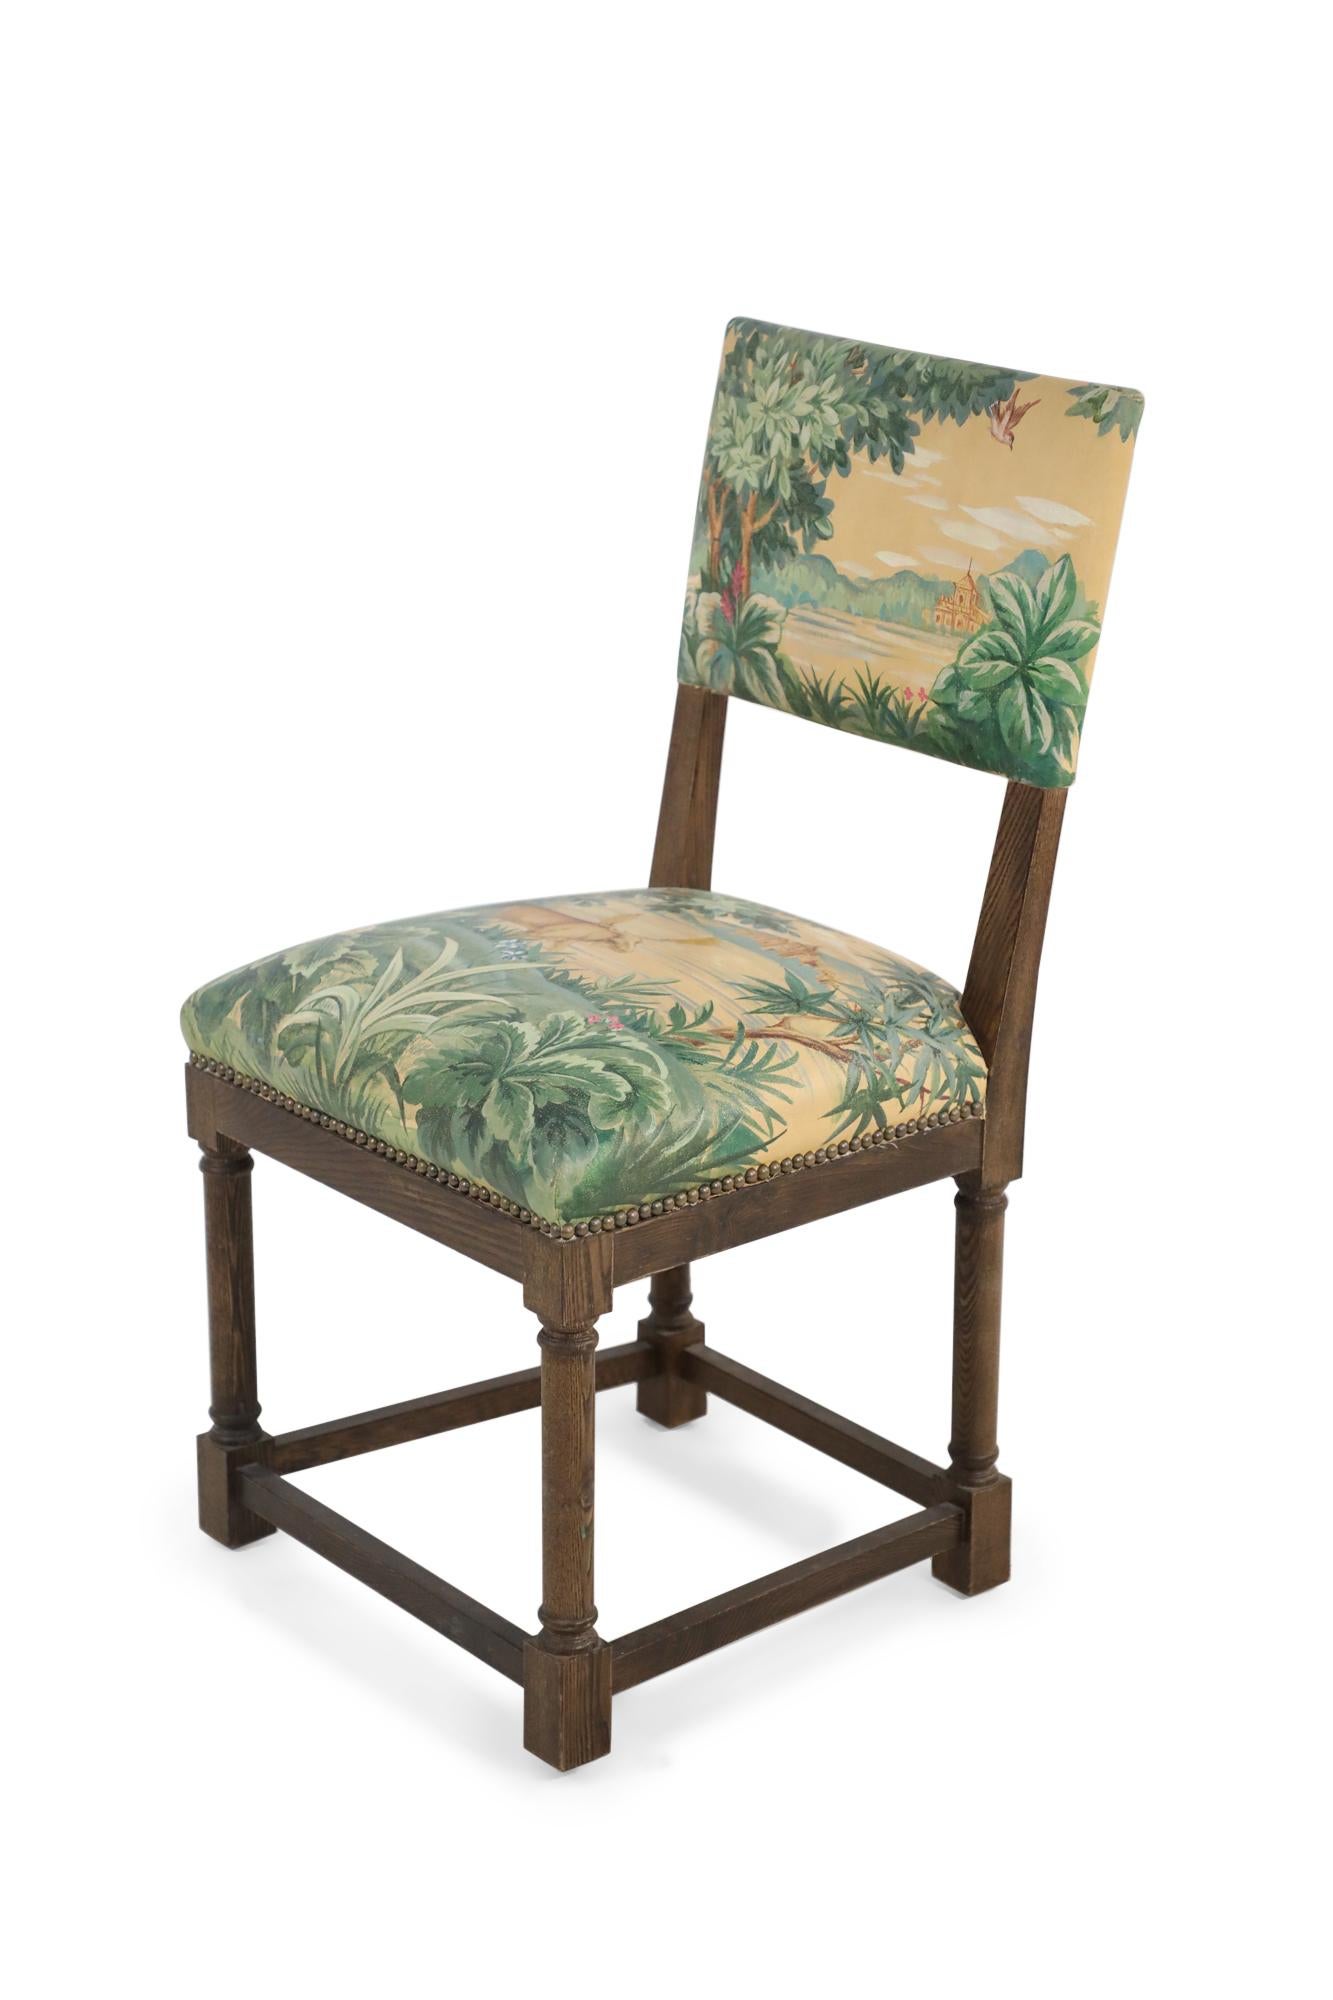 Pair of English Jacobean-style side chairs with walnut frames and hand-painted faux-tapestry upholstery featuring a pastoral scene in greens and yellows.